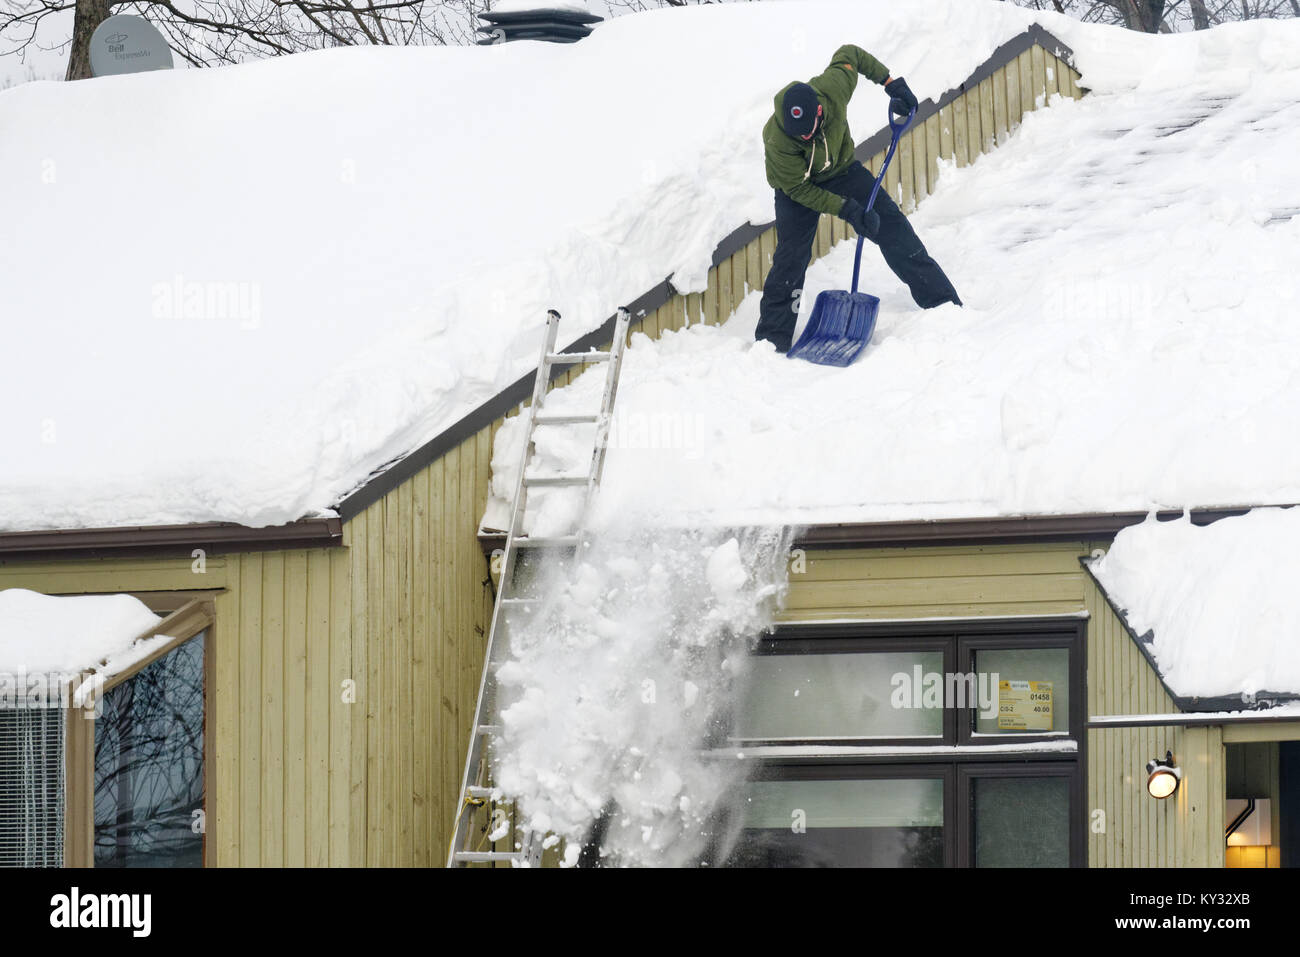 A man clearing snow from the roof of a house, Quebec City in winter Stock Photo